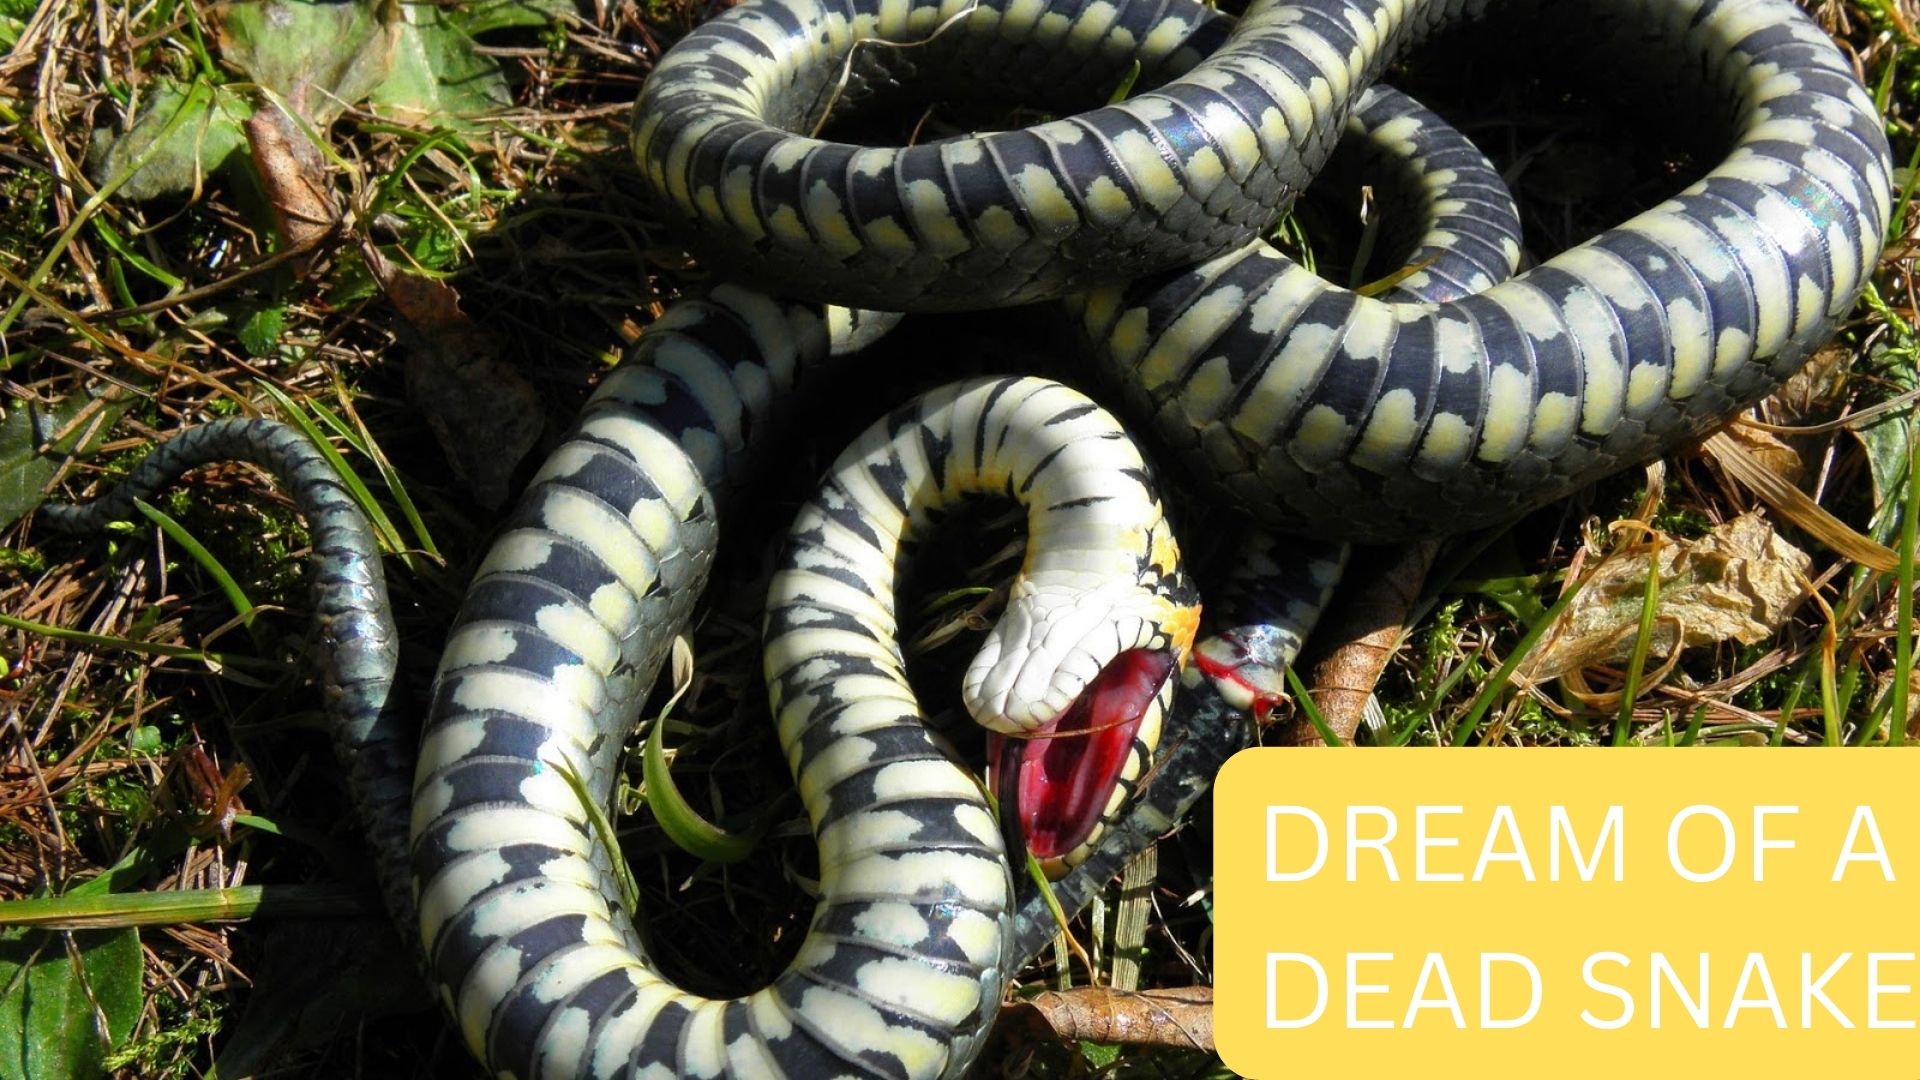 Dream Of A Dead Snake - Symbolizes The End Of A Phase